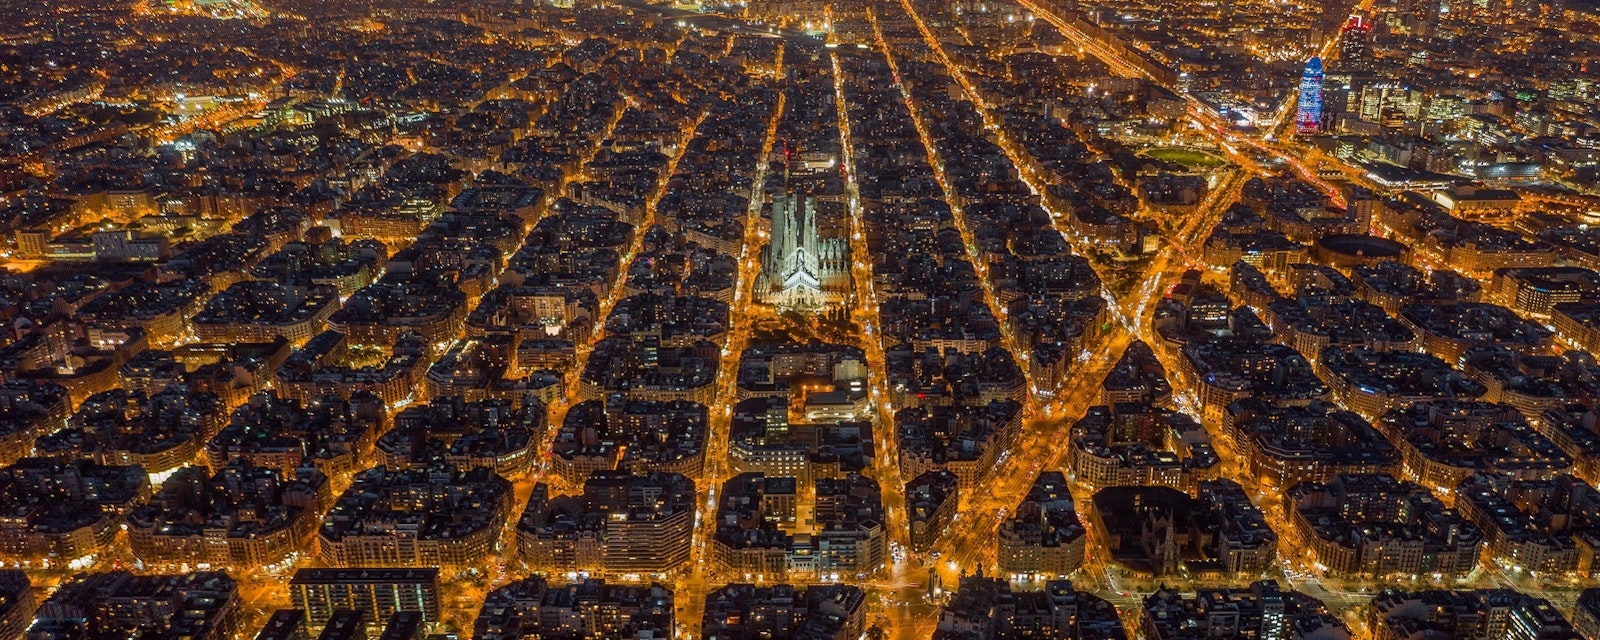 Aerial,Night,View,Of,Barcelona,Eixample,Residencial,District,And,Famous